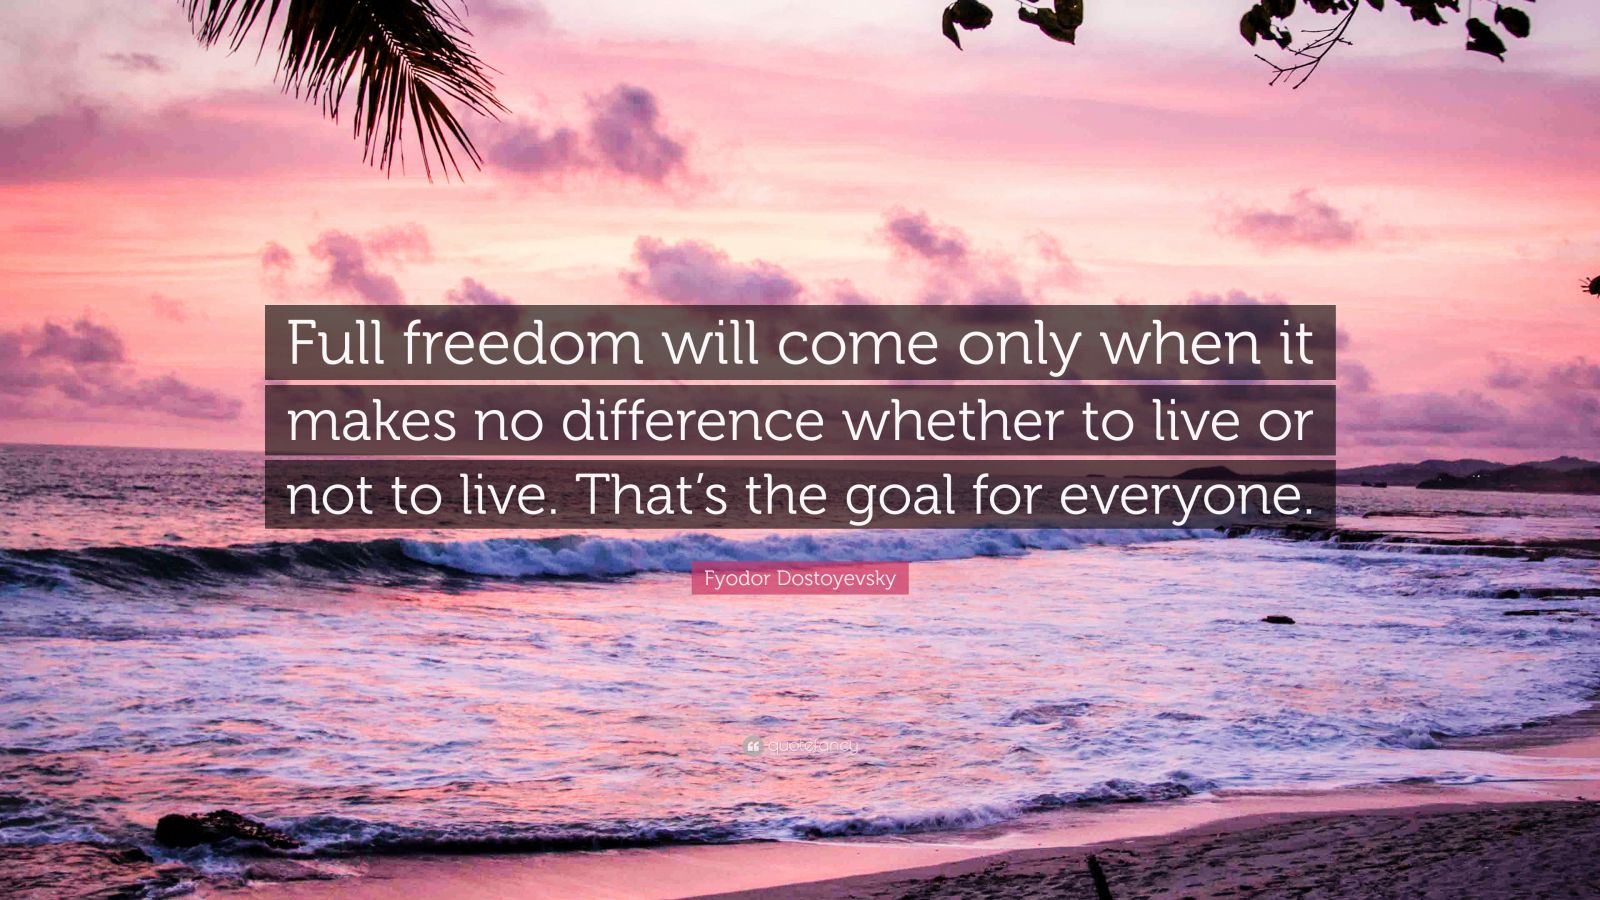 Fyodor Dostoyevsky Quote: “Full freedom will come only when it makes no  difference whether to live or not to live. That's the goal for everyone.”